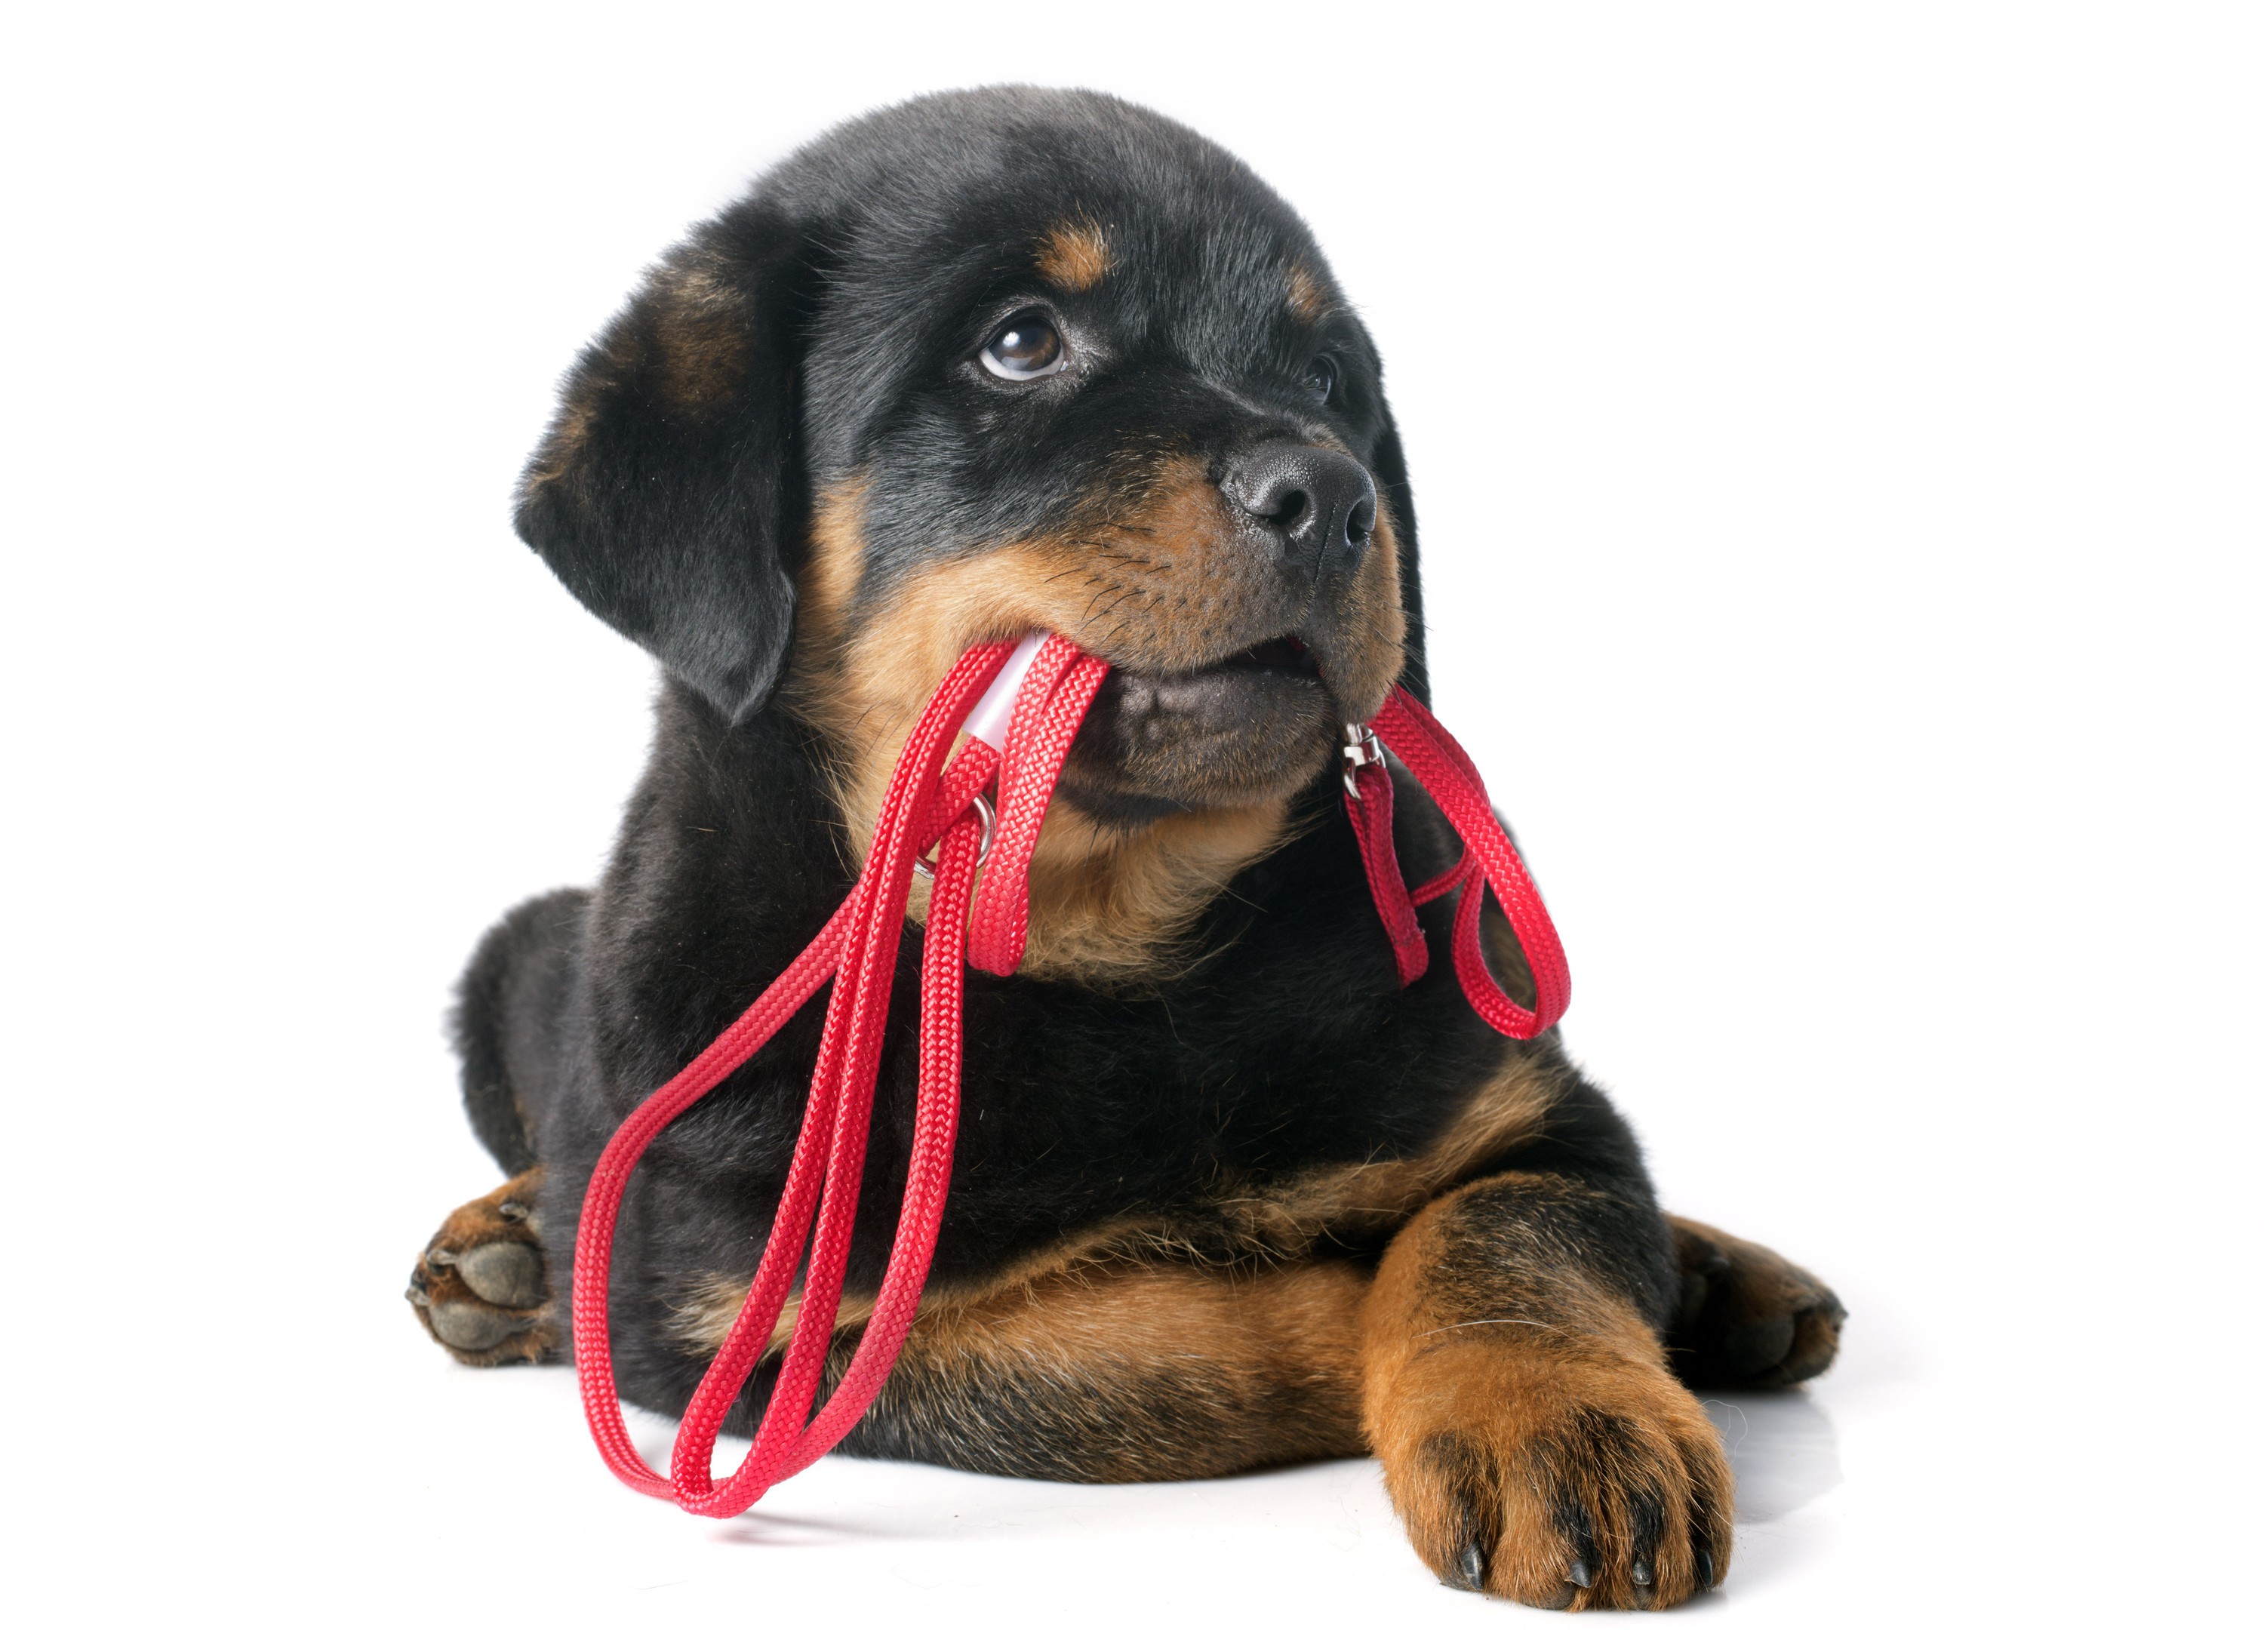 rottie-pup-w-red-leash-canstockphoto16406906.jpg